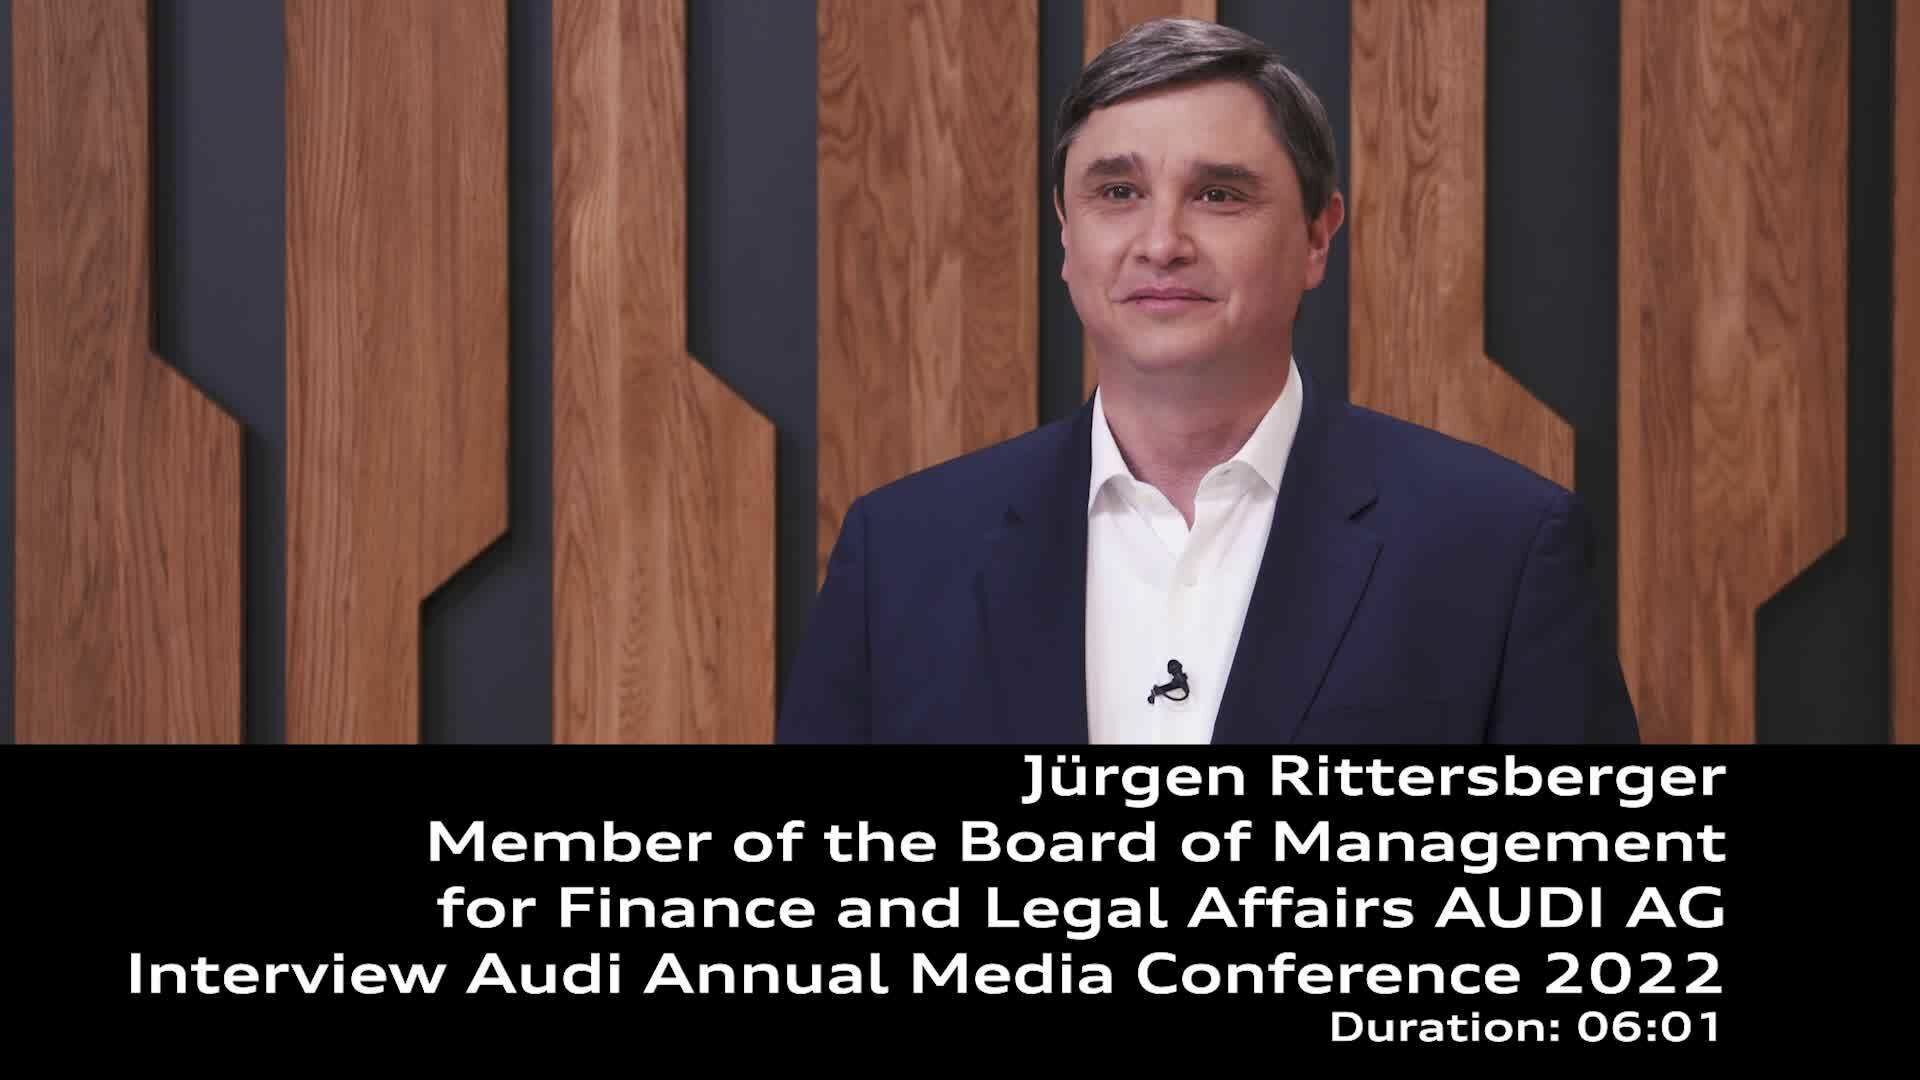 Interview with Jürgen Rittersberger at the Audi Annual Media Conference 2022